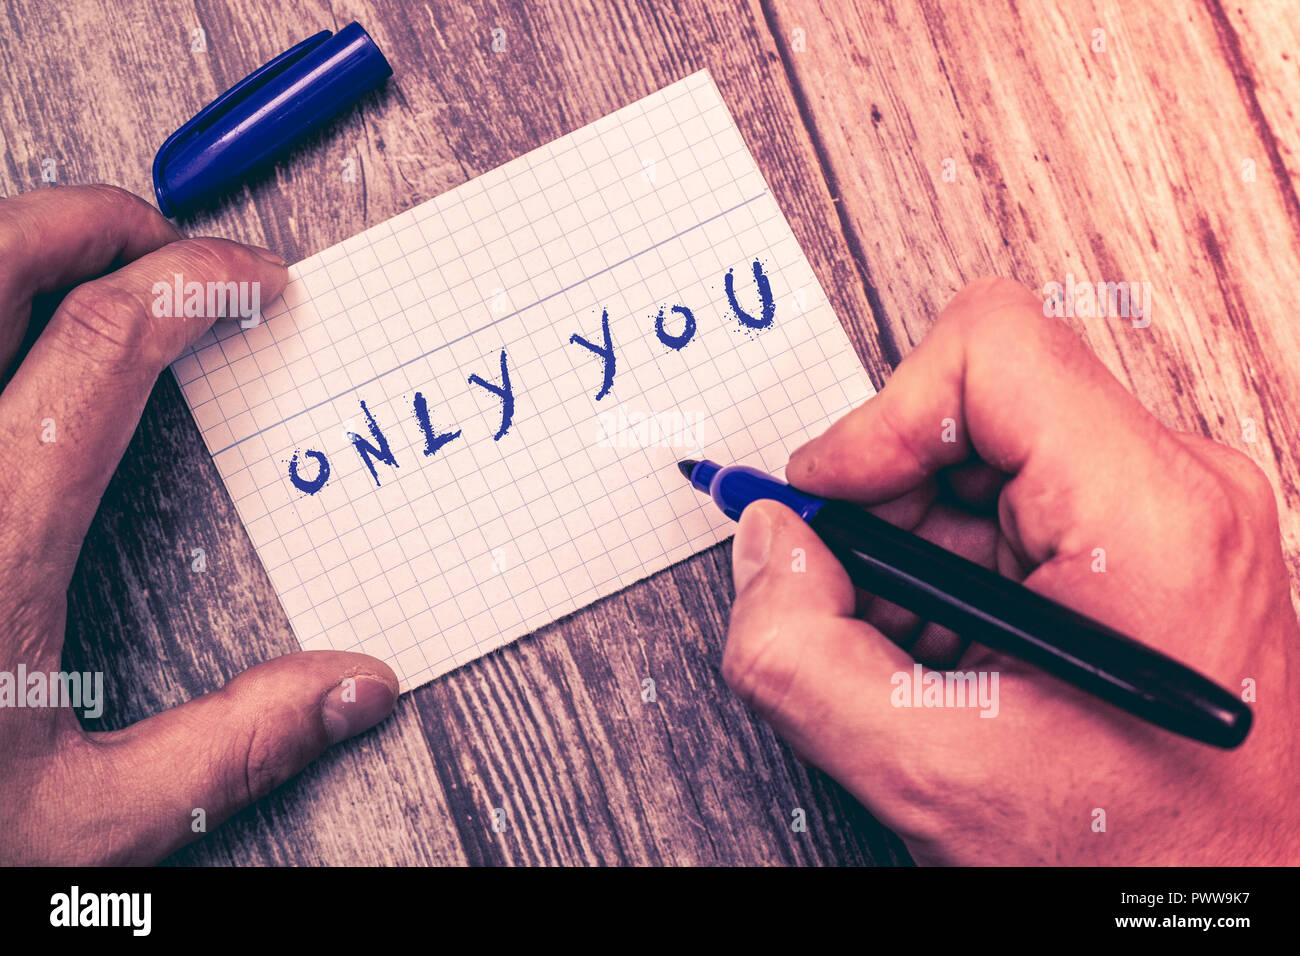 Handwriting Text Writing only You. Concept Meaning the Chosen One No Other  Wanted or Needed Roanalysistic Expression. Stock Illustration -  Illustration of inspiration, phrase: 141591153